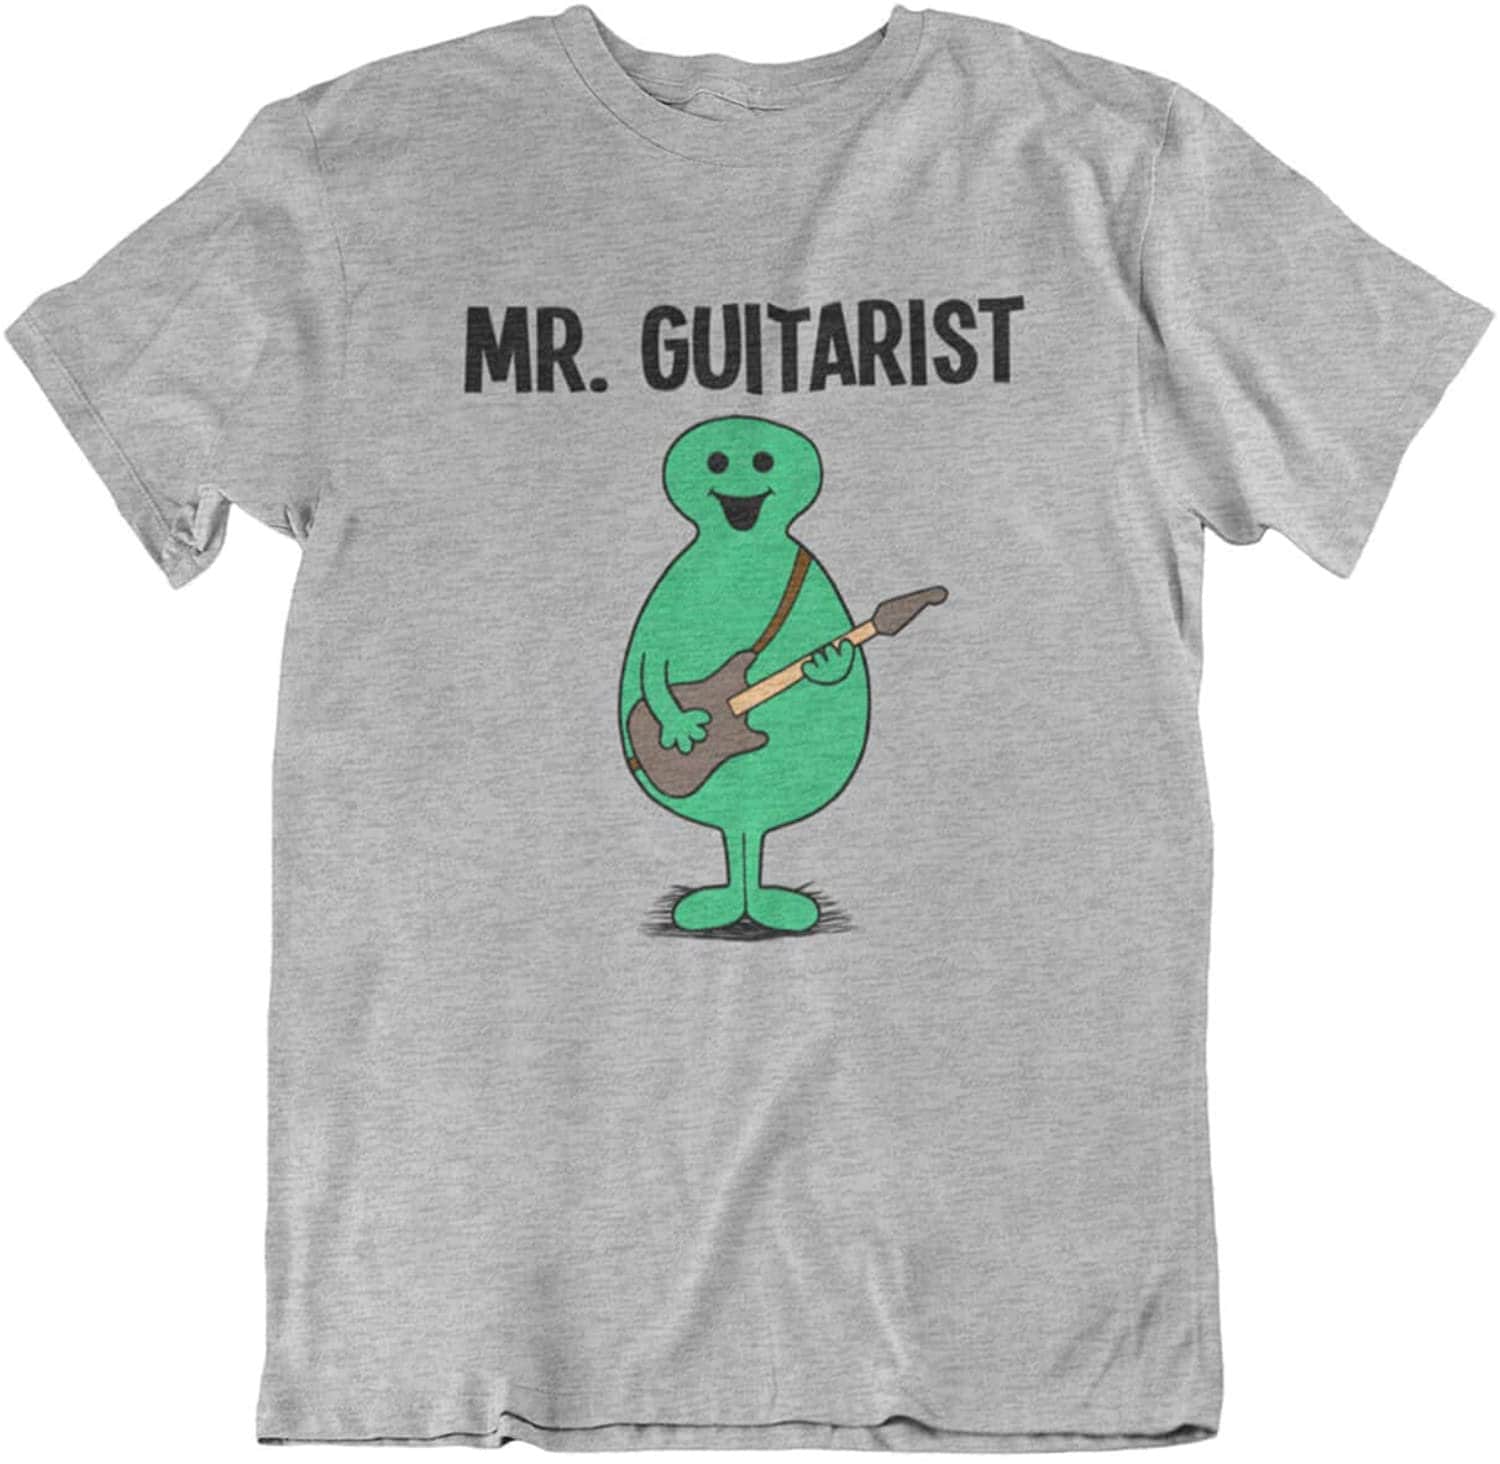 Mr Guitarist - Mens Musician Organic Cotton T-Shirt Sustainable Gift For Him